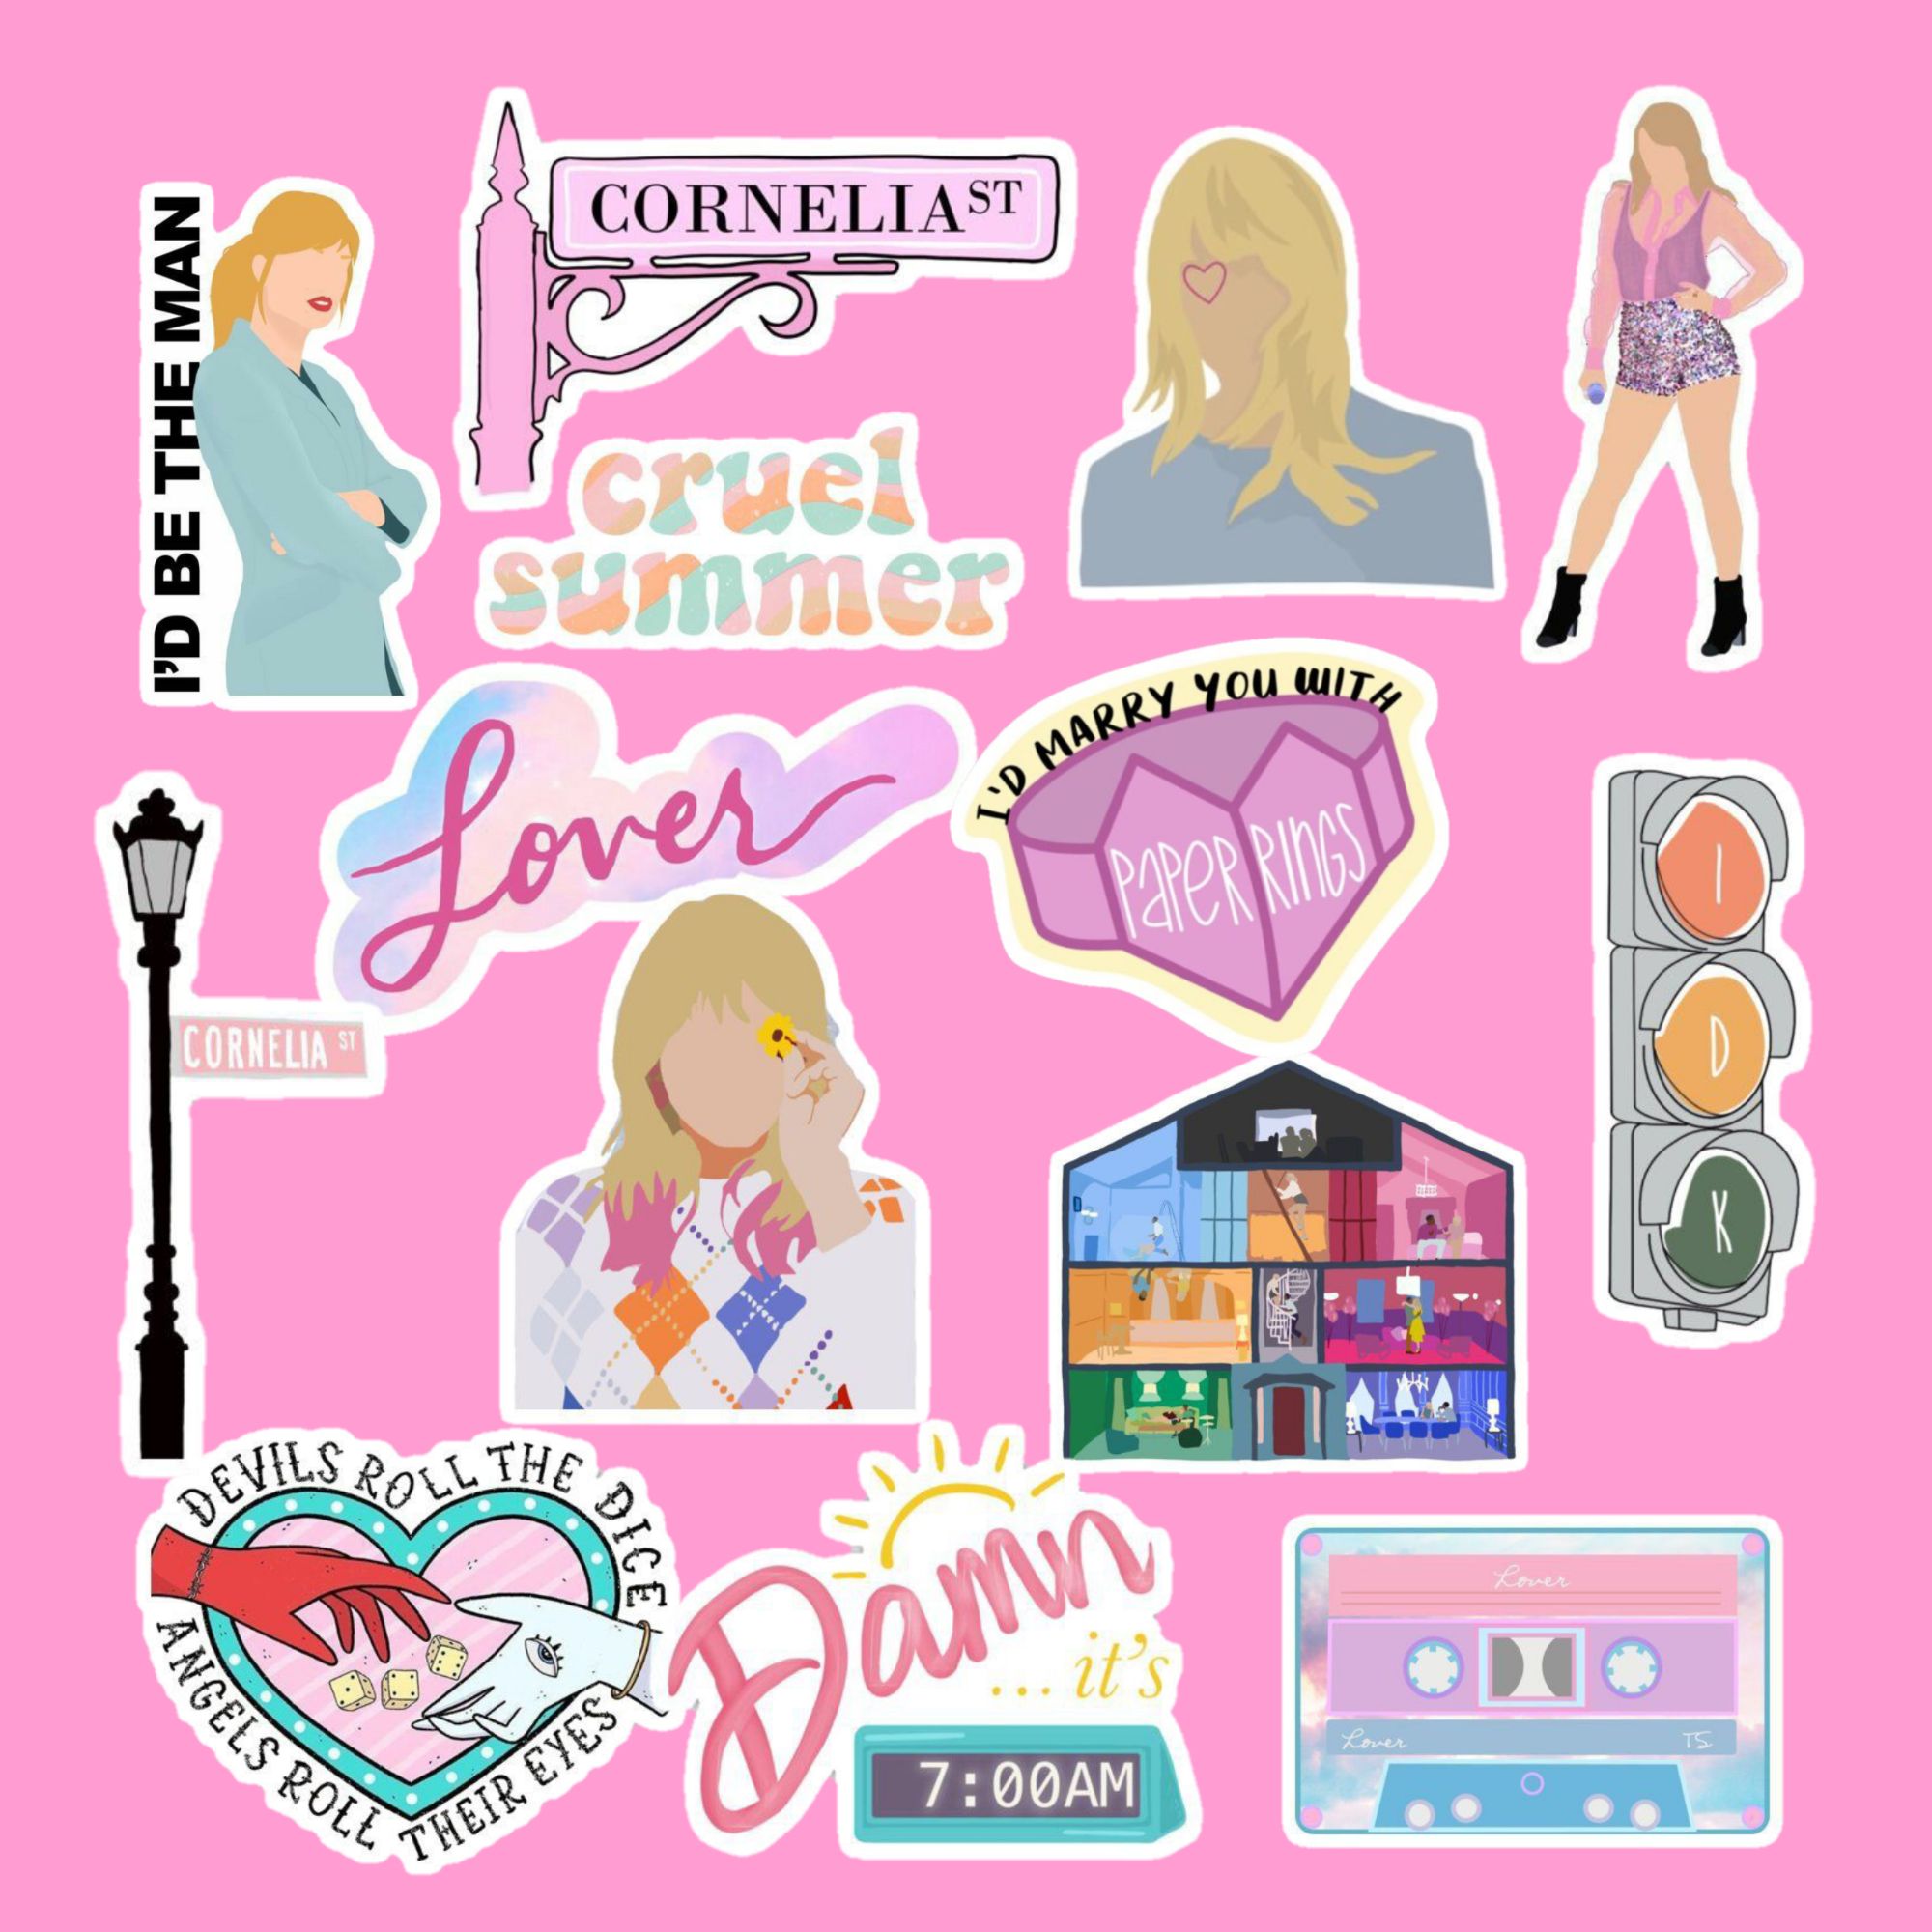 Lover Taylor Swift Laminated VINYL Sticker Waterproof And